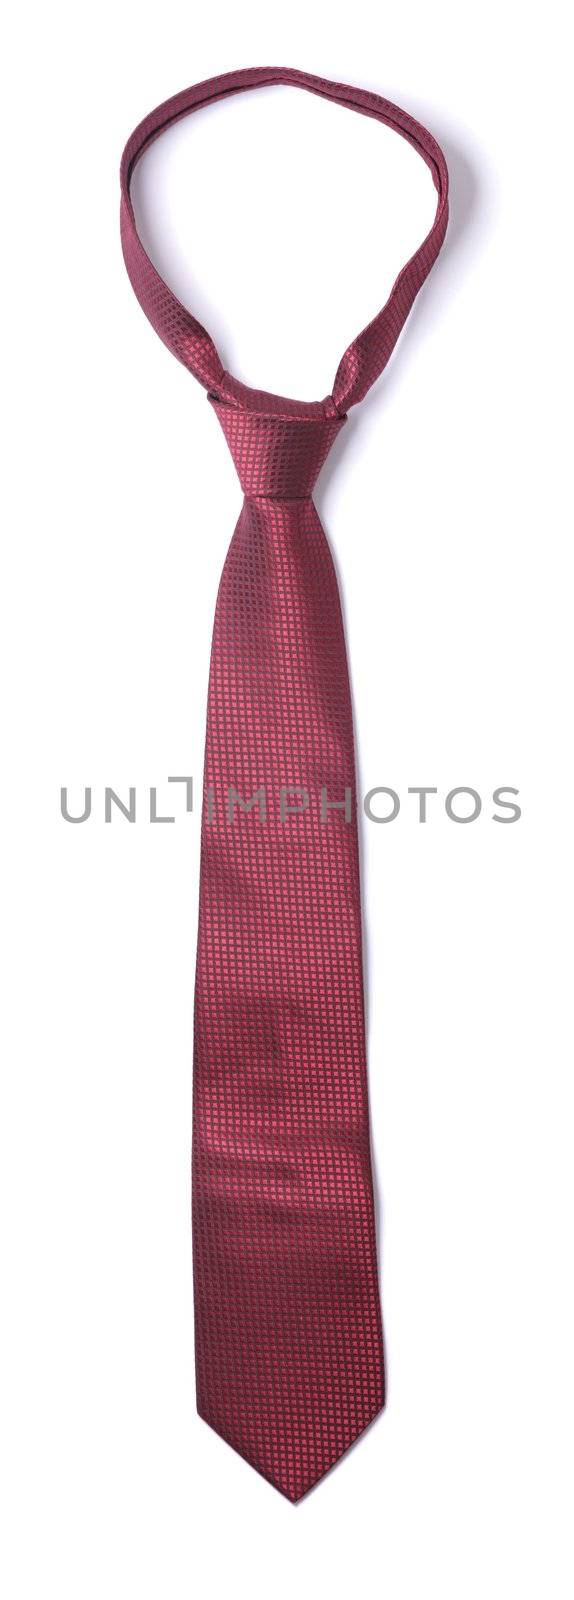 Tie by Stocksnapper